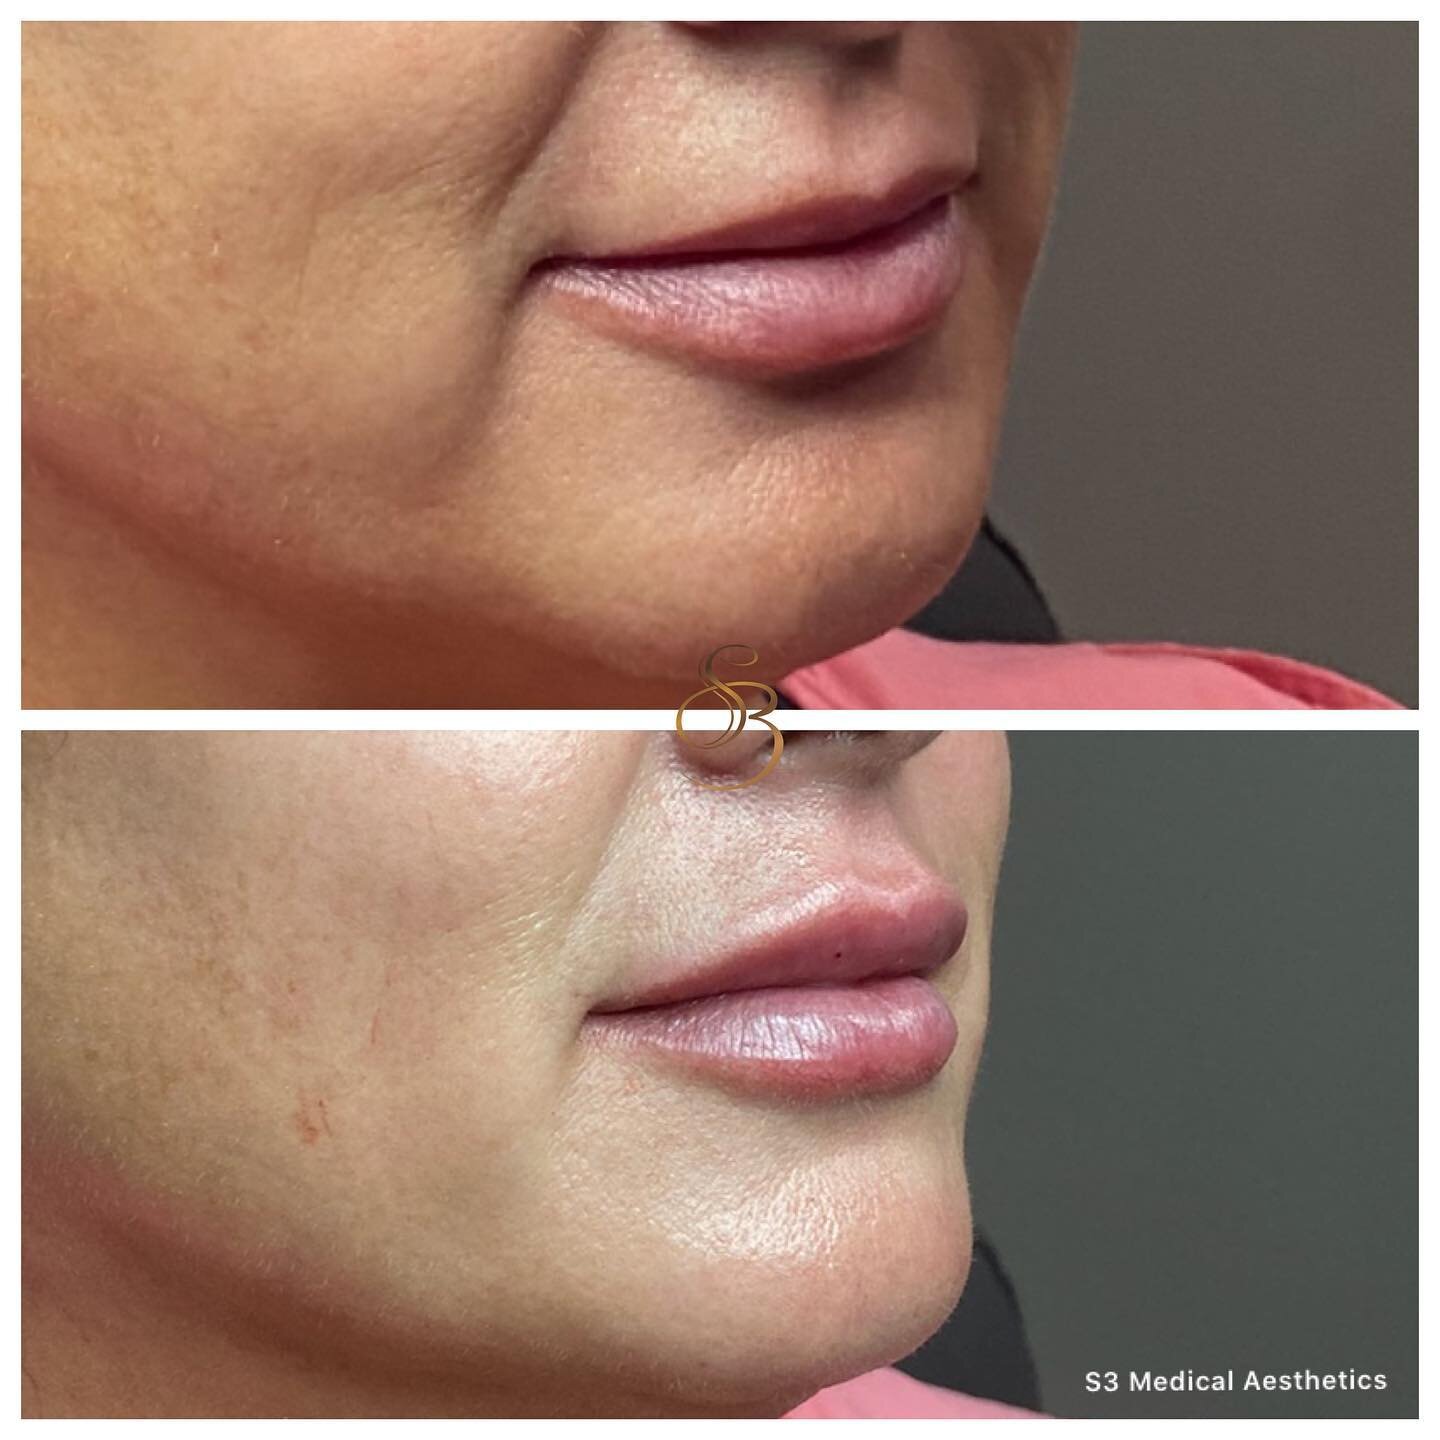 Love her results! #kysse is so beautiful in the lips. If you&rsquo;re thinking about getting your lips done, now is the time! DM or call to book a free consultation. ⁣
.⁣
.⁣
.⁣
#kysse #restylane #dermalfillers #lips #pout #sexylips #lipsbys3 #mdinjec